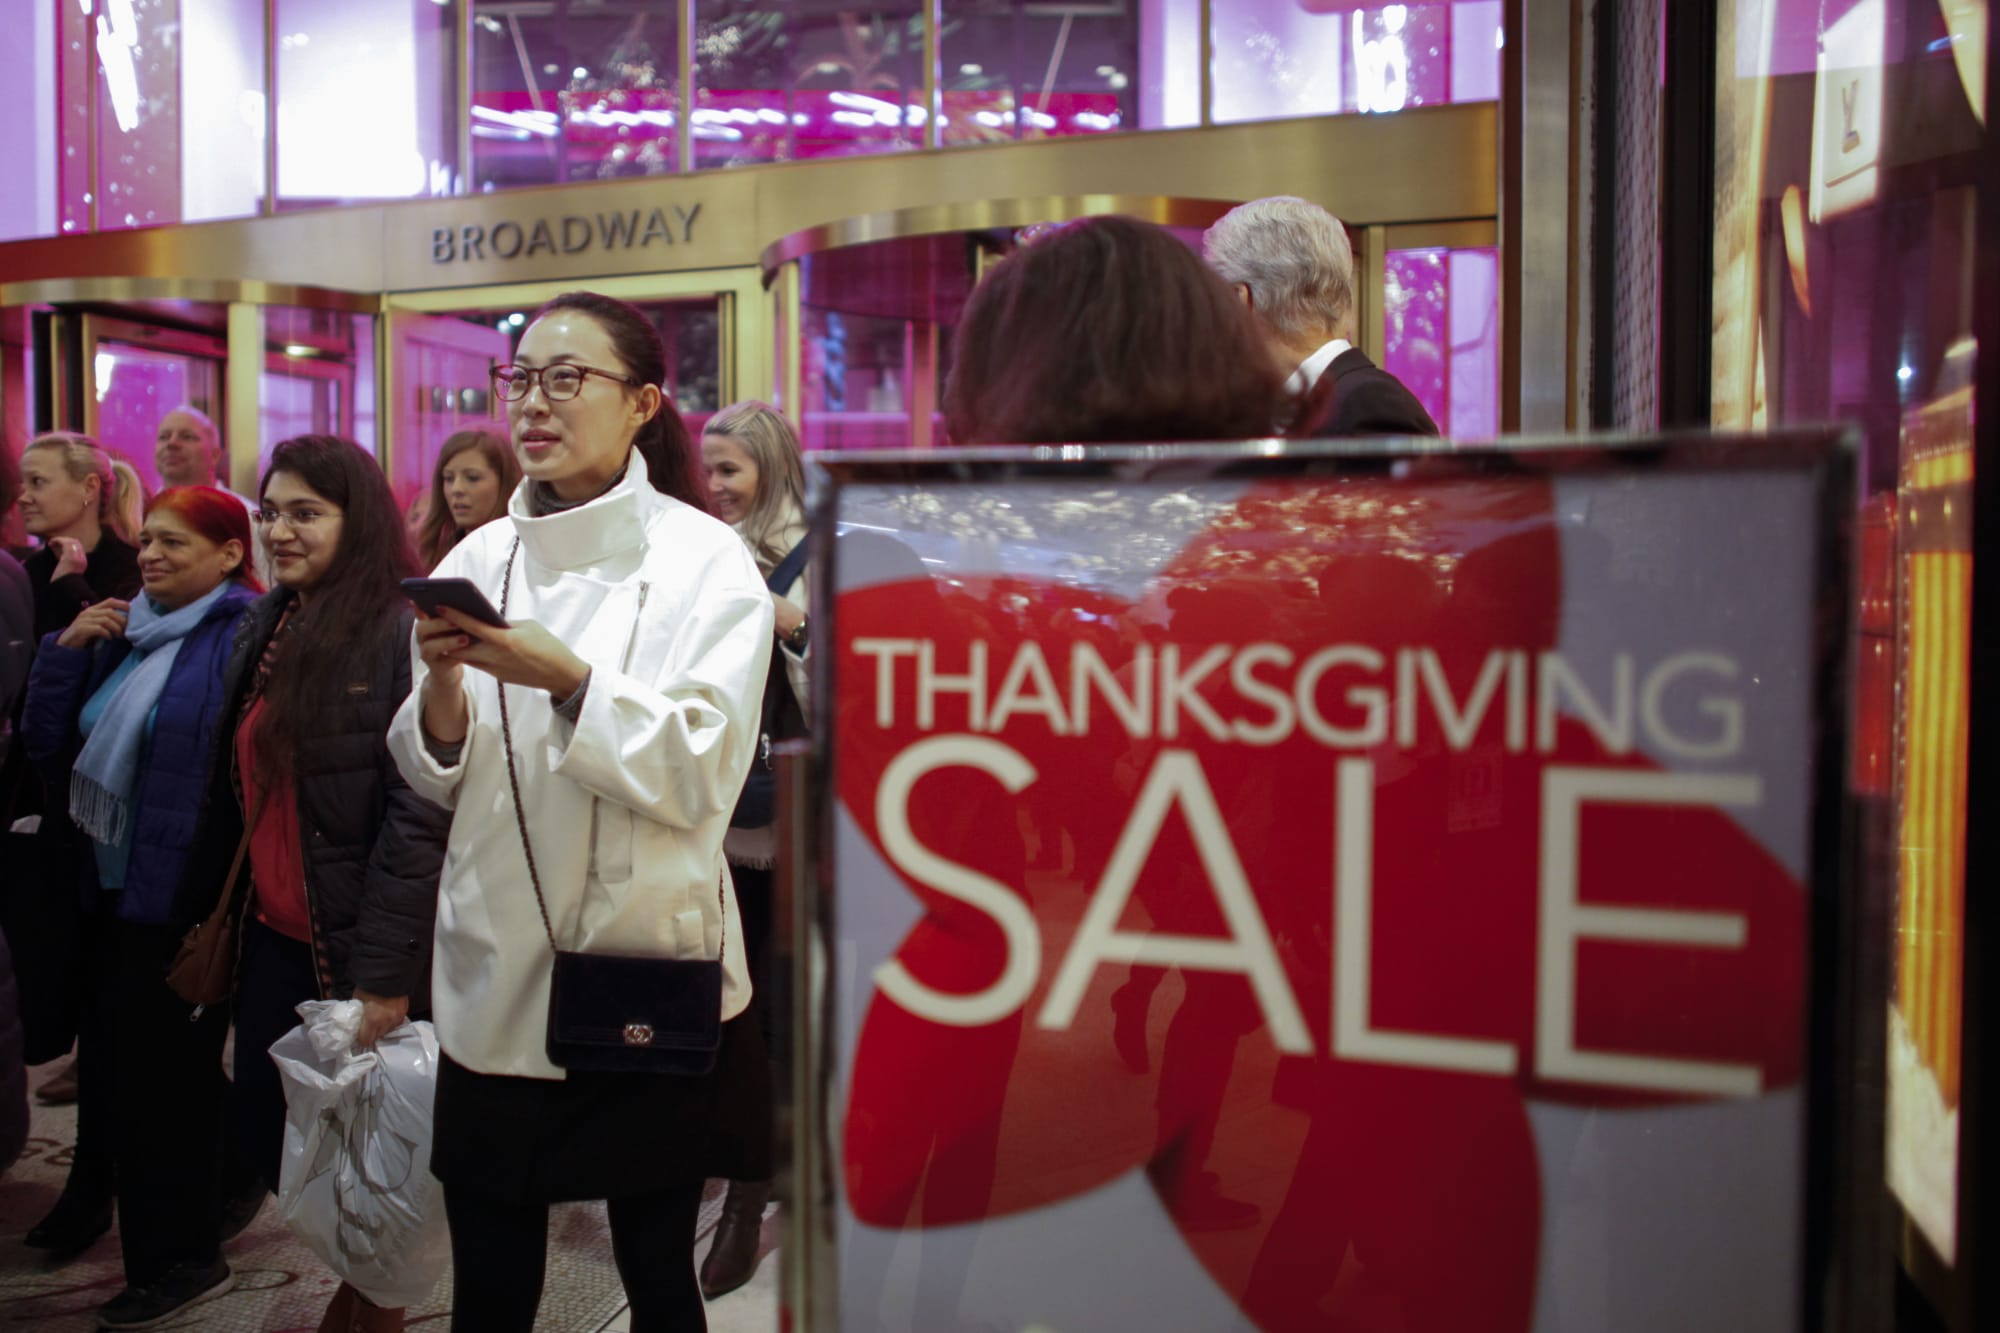 Black Friday 2016: What are Macy's hours? - What Stores Are Open Late Tonight For Black Friday